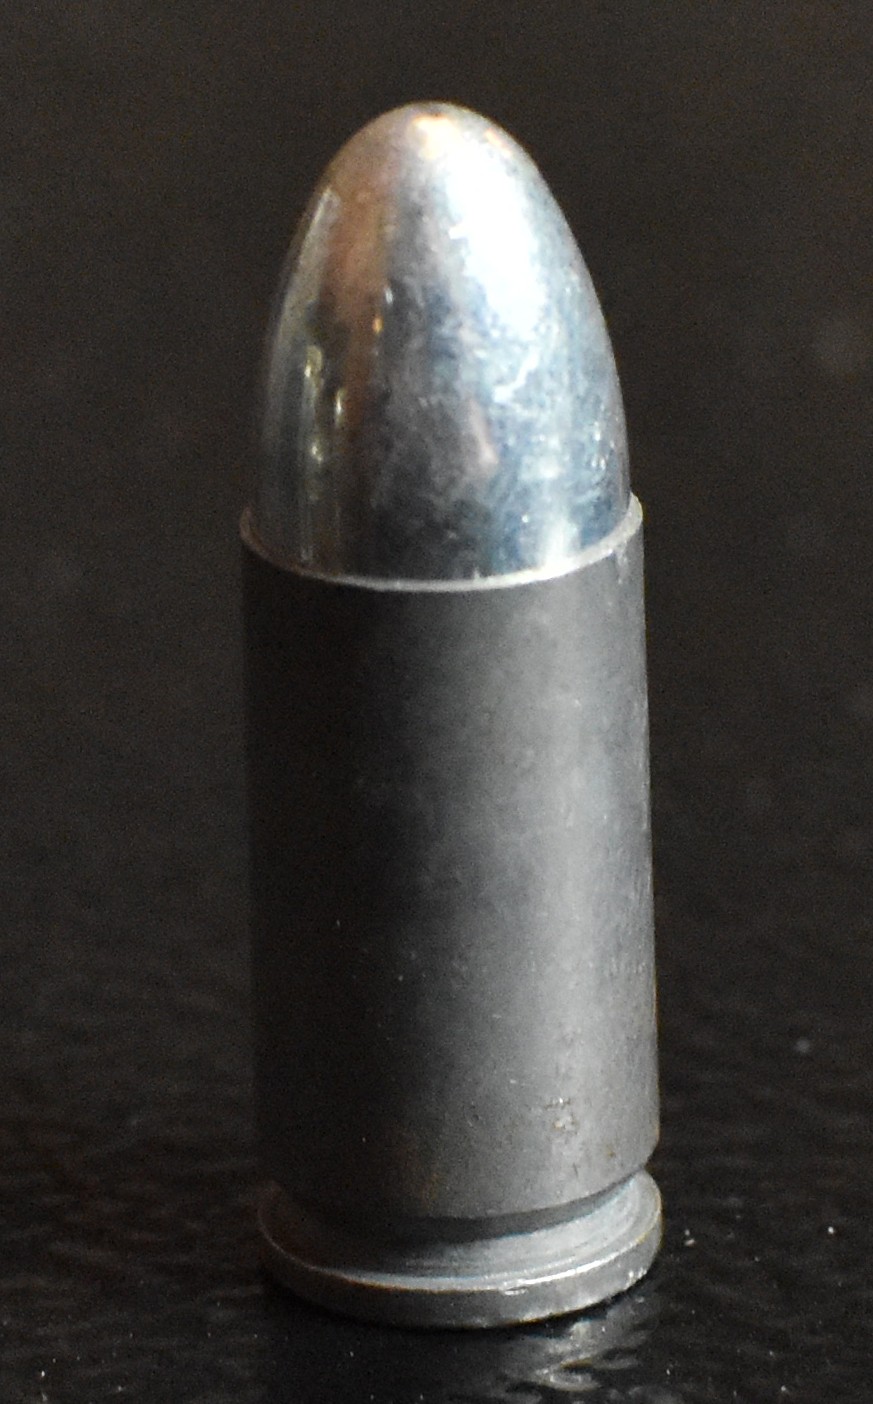 Single round of Tula 9x19 ammunition with a steel case